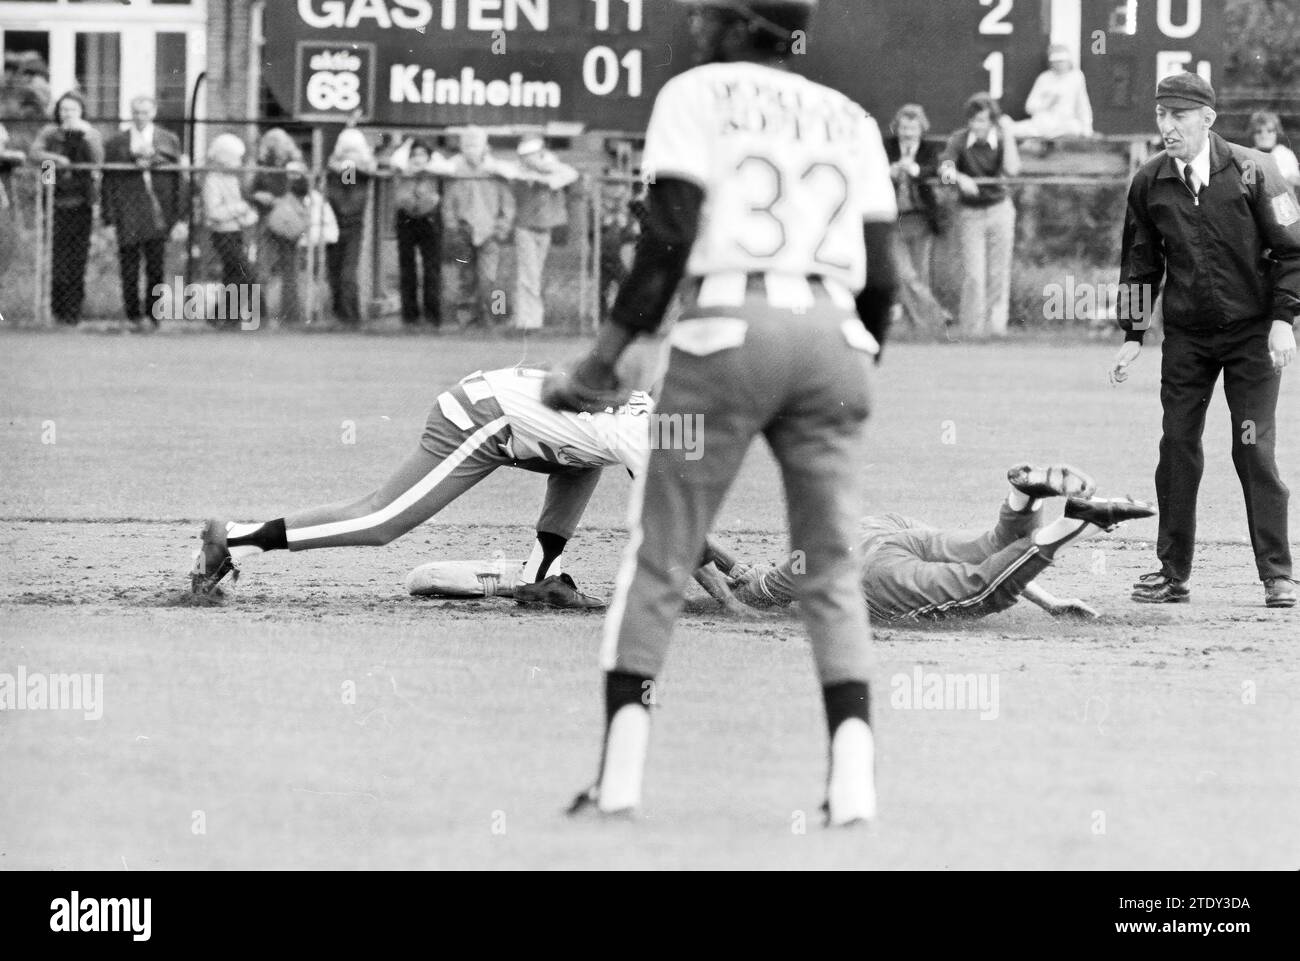 Baseball Action '68 - Dorlas Quick, Baseball, 07-09-1975, Whizgle News from the Past, Tailored for the Future. Explore historical narratives, Dutch The Netherlands agency image with a modern perspective, bridging the gap between yesterday's events and tomorrow's insights. A timeless journey shaping the stories that shape our future. Stock Photo